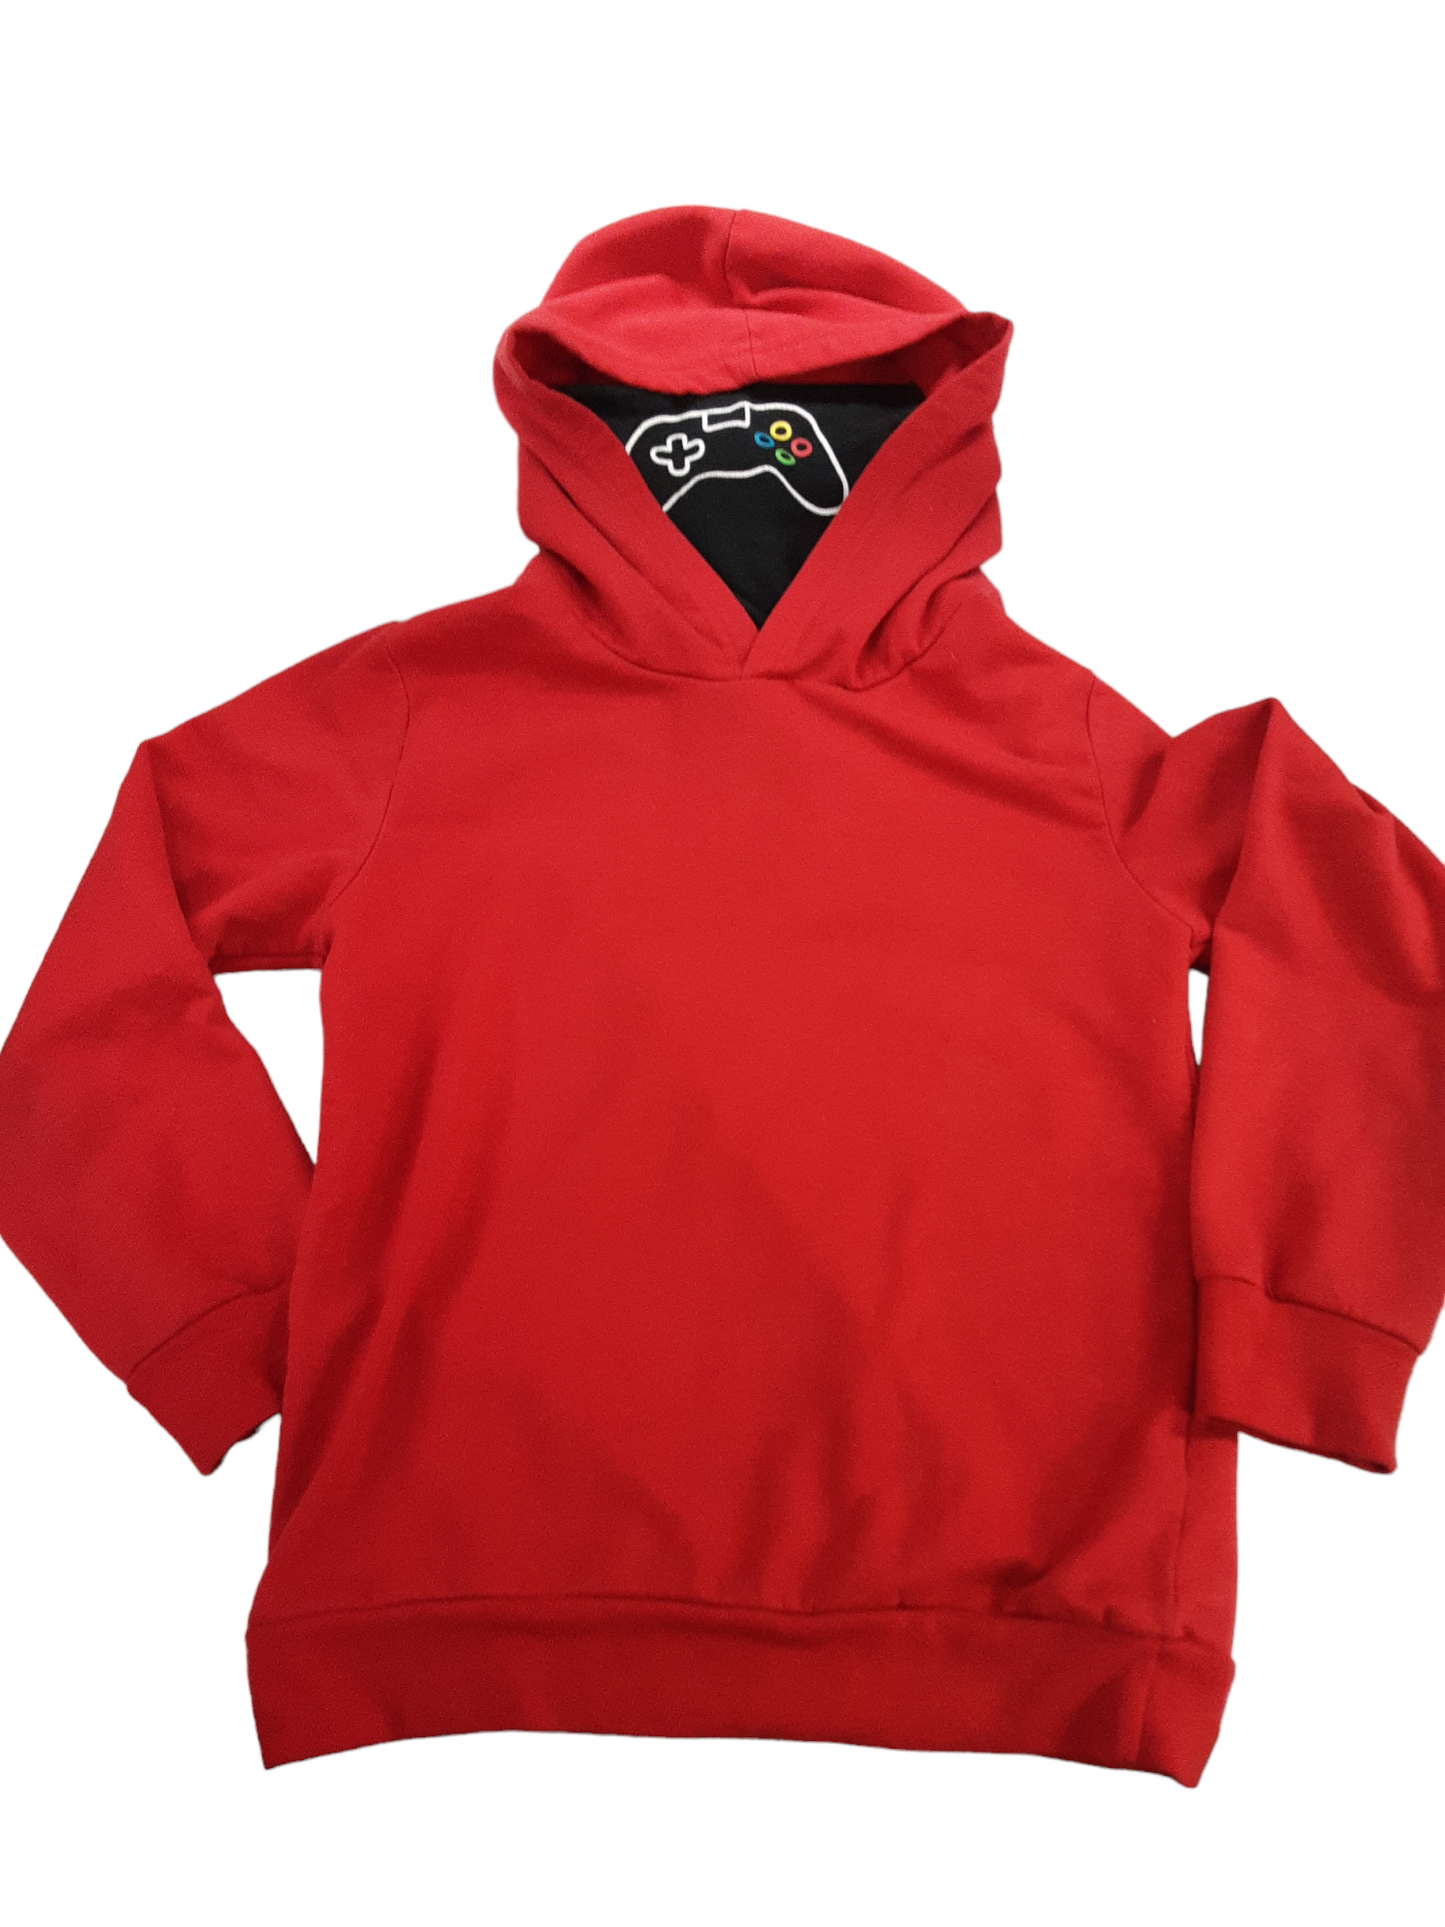 Gamer hoodie with built in neck warmer size 7-8